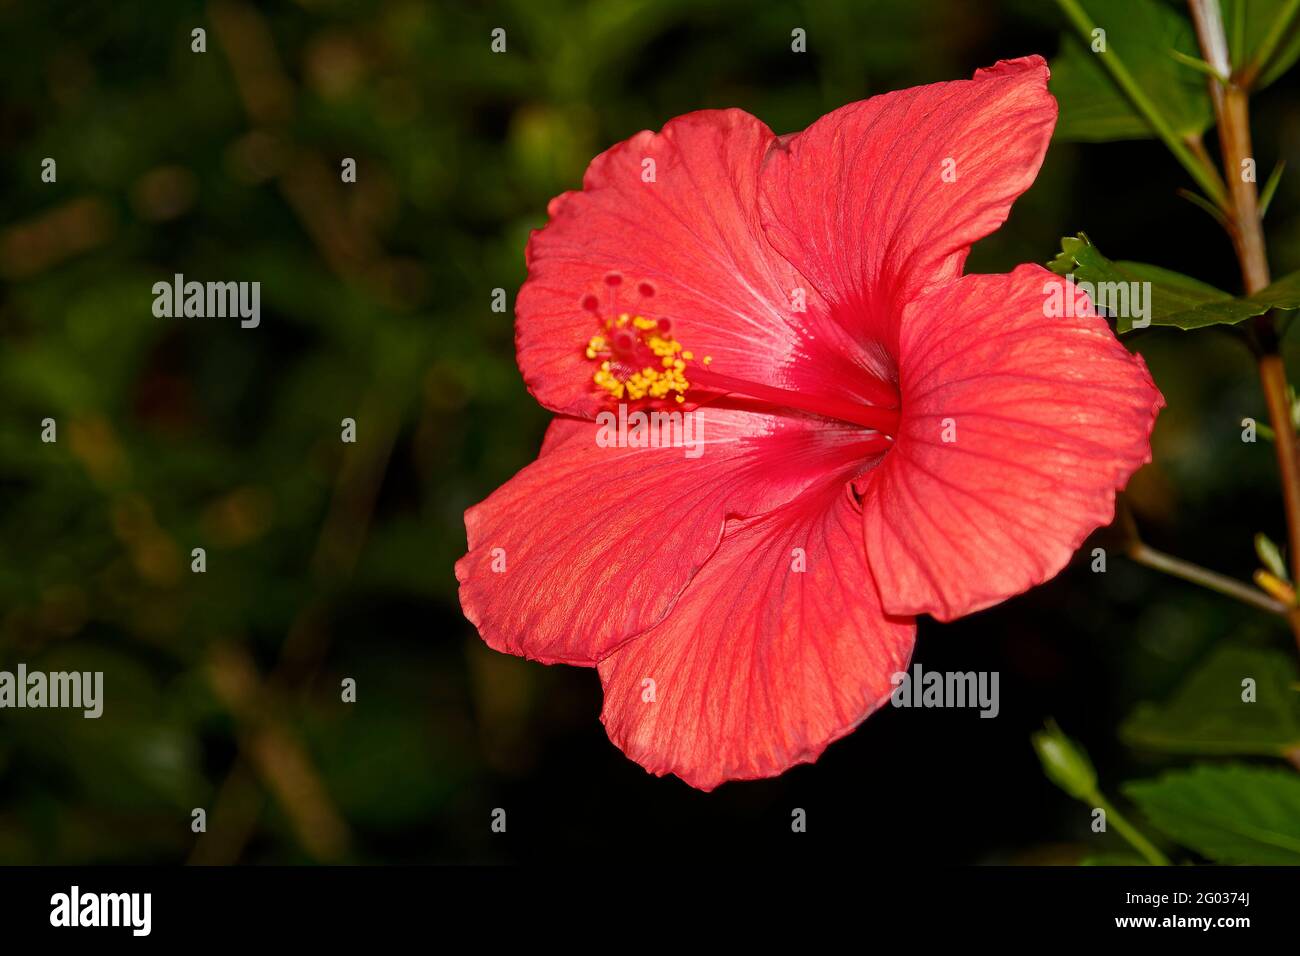 salmon color hibiscus, cultivated flower, large, close-up, nature, shrub, Malvaceae family Stock Photo